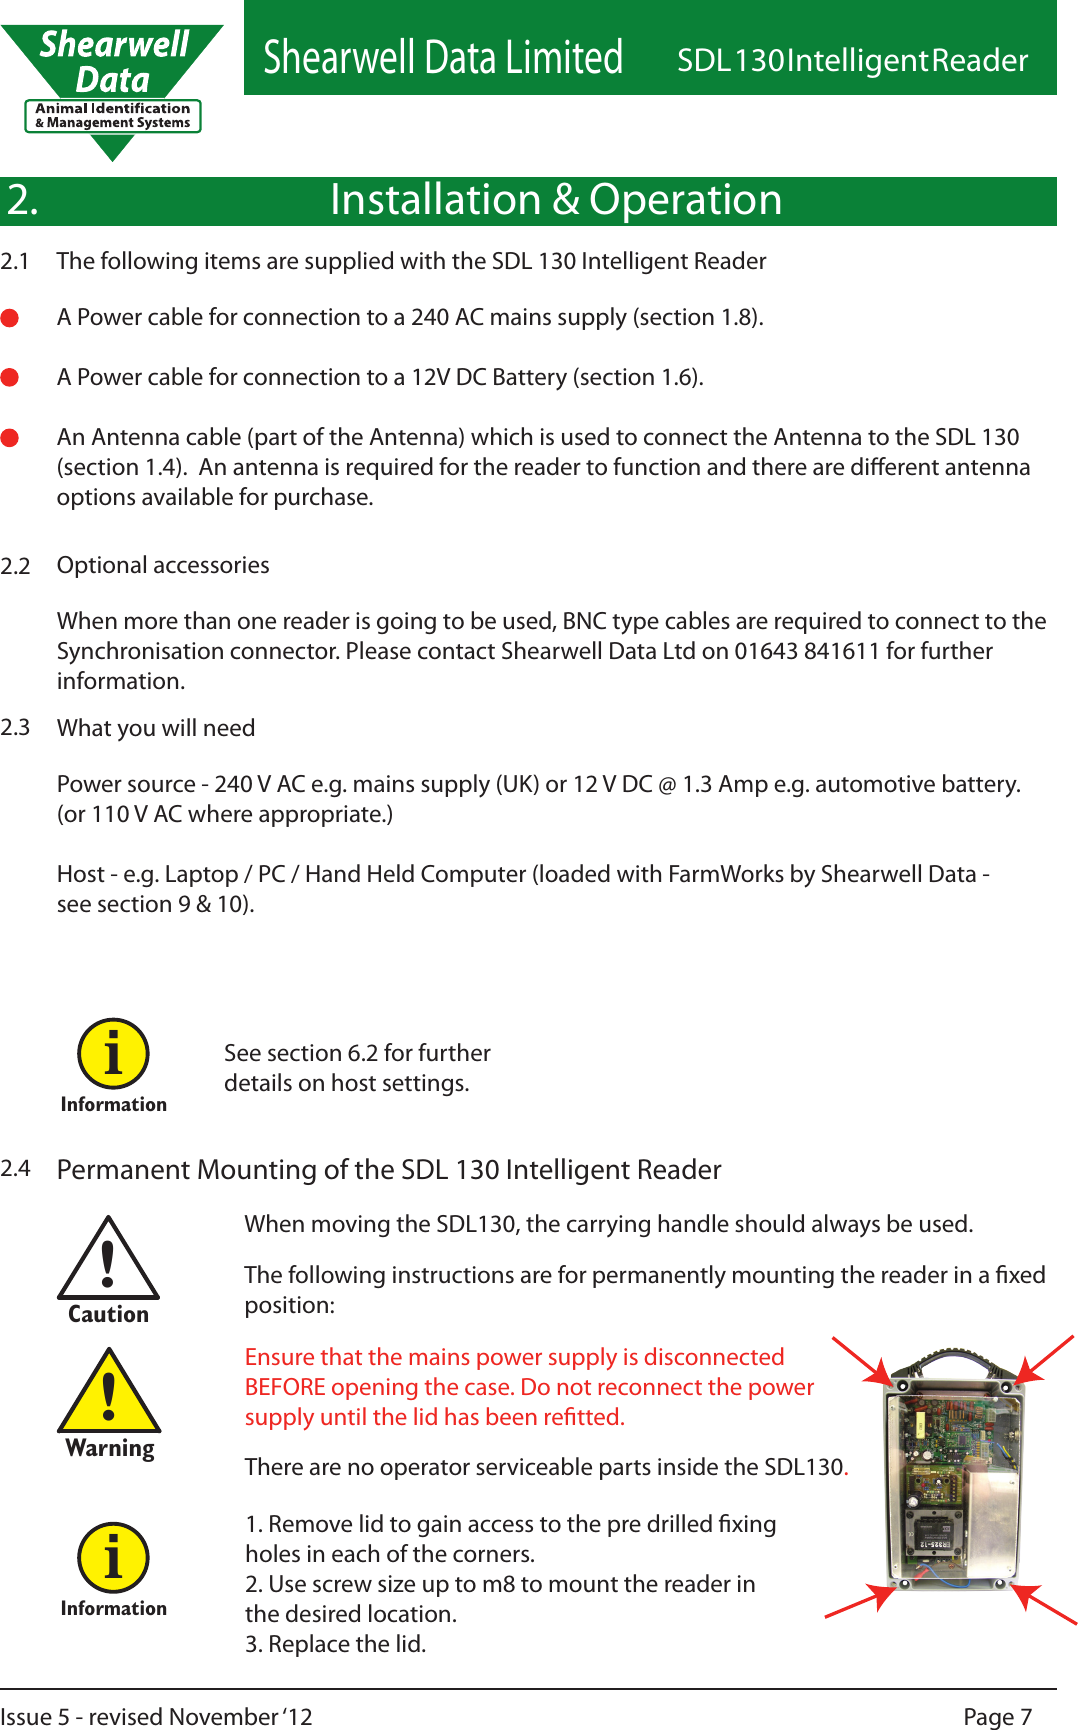 Shearwell Data LimitedSDL 130 Intelligent ReaderPage 7Issue 5 - revised November ‘12What you will need2.3Power source - 240 V AC e.g. mains supply (UK) or 12 V DC @ 1.3 Amp e.g. automotive battery.(or 110 V AC where appropriate.)Host - e.g. Laptop / PC / Hand Held Computer (loaded with FarmWorks by Shearwell Data - see section 9 &amp; 10). When more than one reader is going to be used, BNC type cables are required to connect to the Synchronisation connector. Please contact Shearwell Data Ltd on 01643 841611 for further information.Optional accessories2.2See section 6.2 for further details on host settings.Informationi1. Remove lid to gain access to the pre drilled xing holes in each of the corners. 2. Use screw size up to m8 to mount the reader in the desired location.  3. Replace the lid.When moving the SDL130, the carrying handle should always be used. The following instructions are for permanently mounting the reader in a xed position:Permanent Mounting of the SDL 130 Intelligent Reader2.4!CautionEnsure that the mains power supply is disconnected BEFORE opening the case. Do not reconnect the power supply until the lid has been retted.There are no operator serviceable parts inside the SDL130.!WarningInformationiInstallation &amp; OperationThe following items are supplied with the SDL 130 Intelligent Reader2.1A Power cable for connection to a 240 AC mains supply (section 1.8).A Power cable for connection to a 12V DC Battery (section 1.6).An Antenna cable (part of the Antenna) which is used to connect the Antenna to the SDL 130  (section 1.4).  An antenna is required for the reader to function and there are dierent antenna options available for purchase.2.